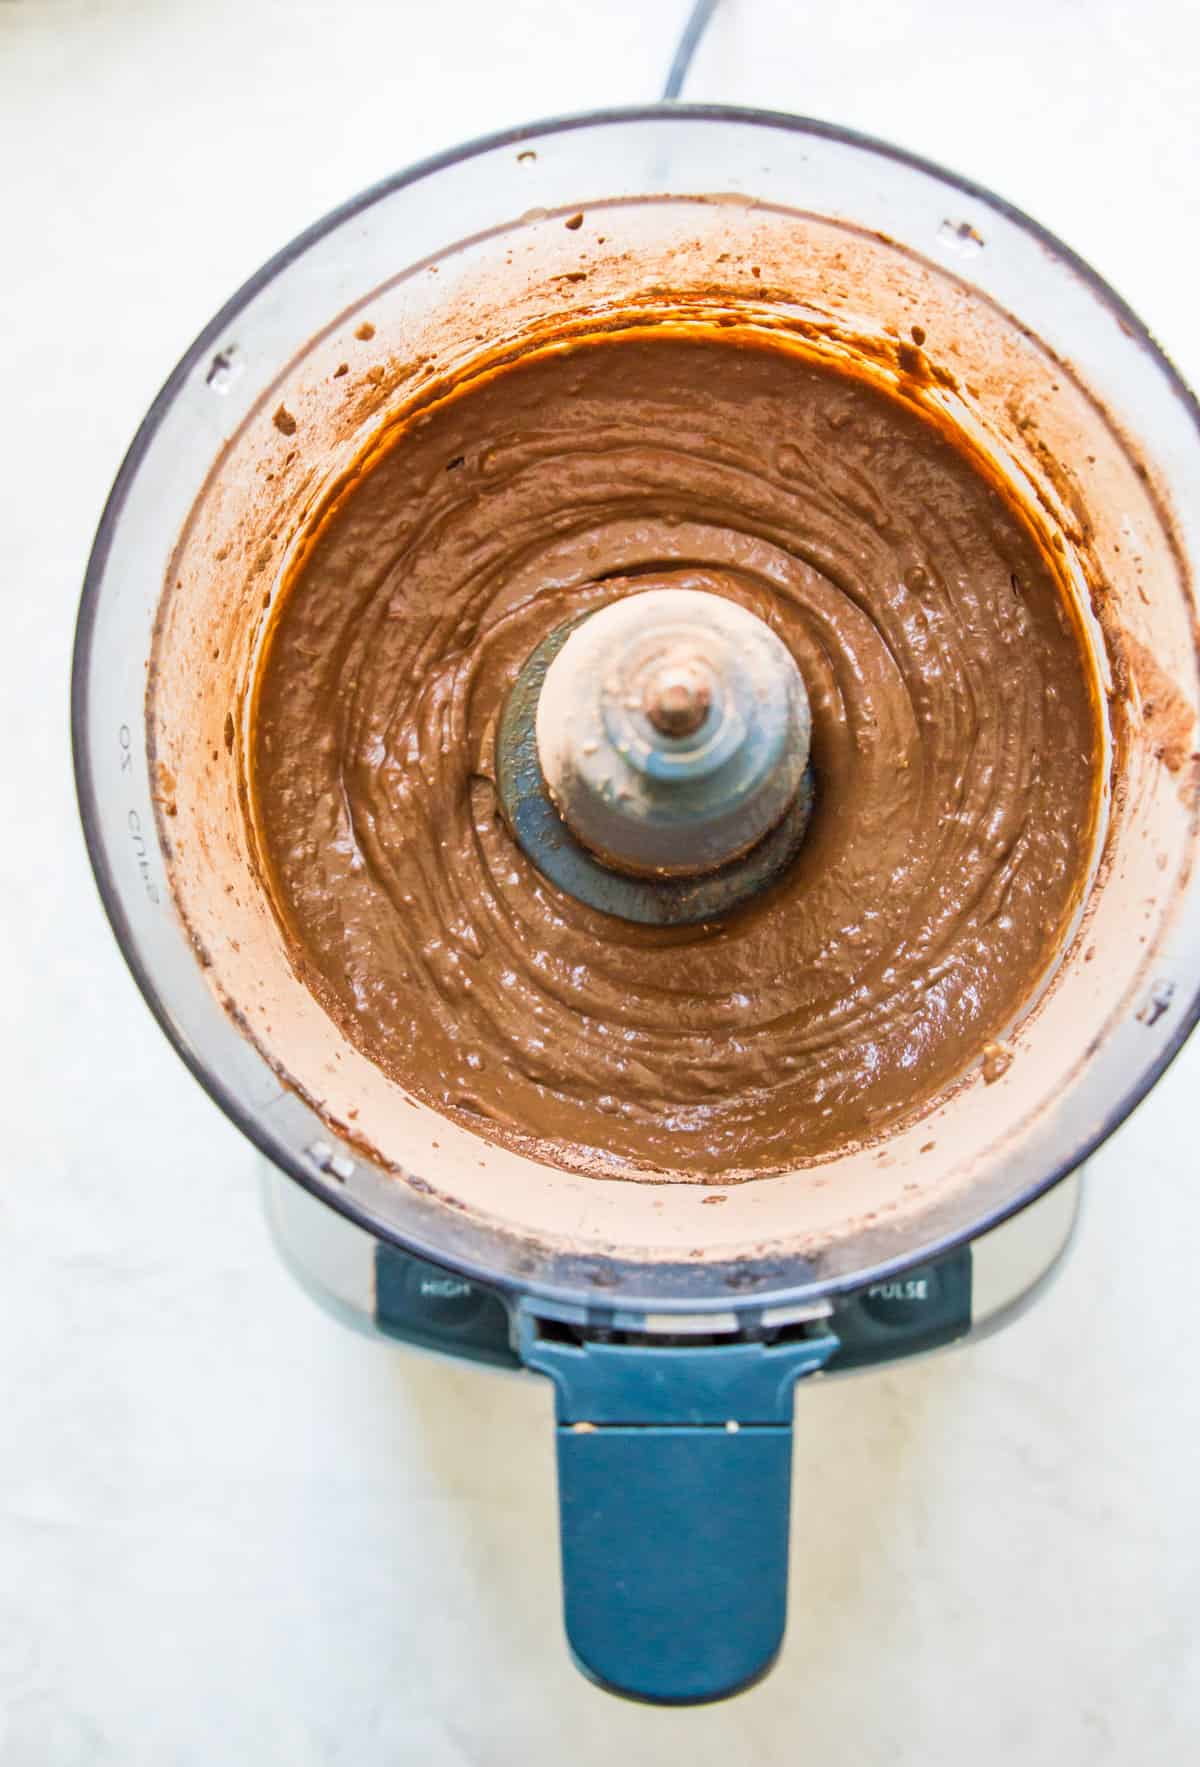 A blended chocolate avocado mousse in a food processor.